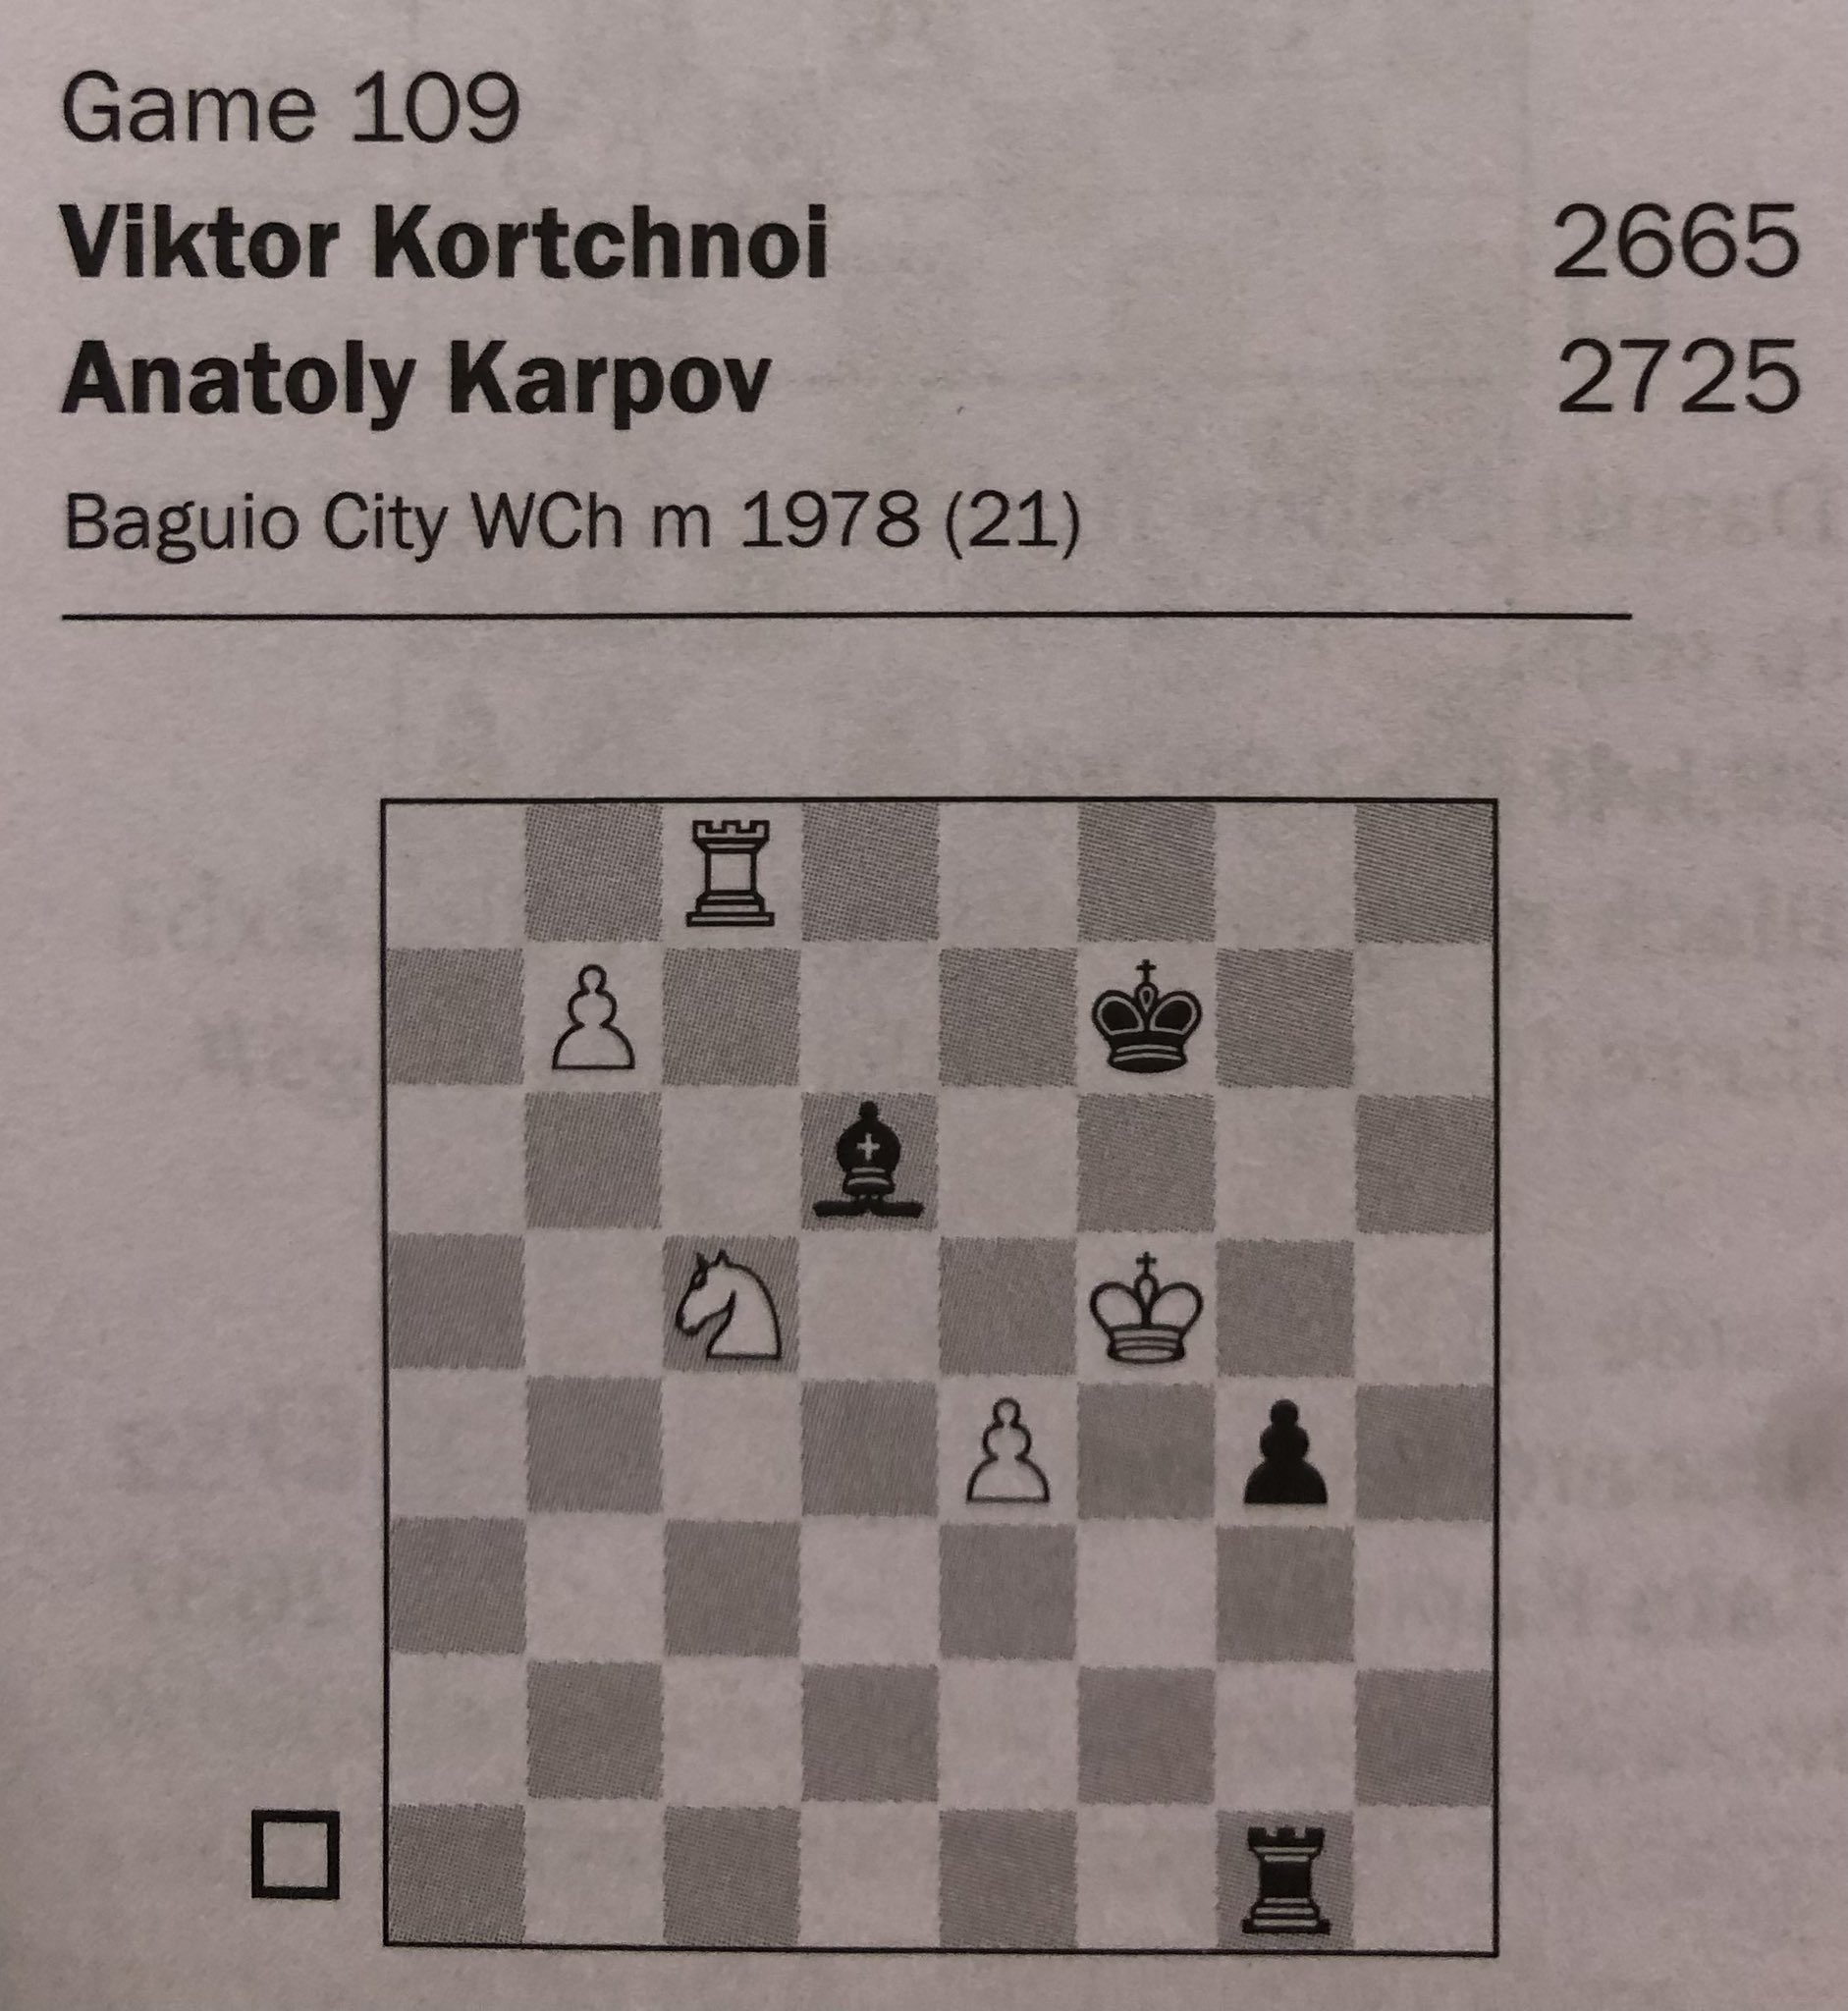 Yuriy Krykun on X: A little tactical exercise I came across while